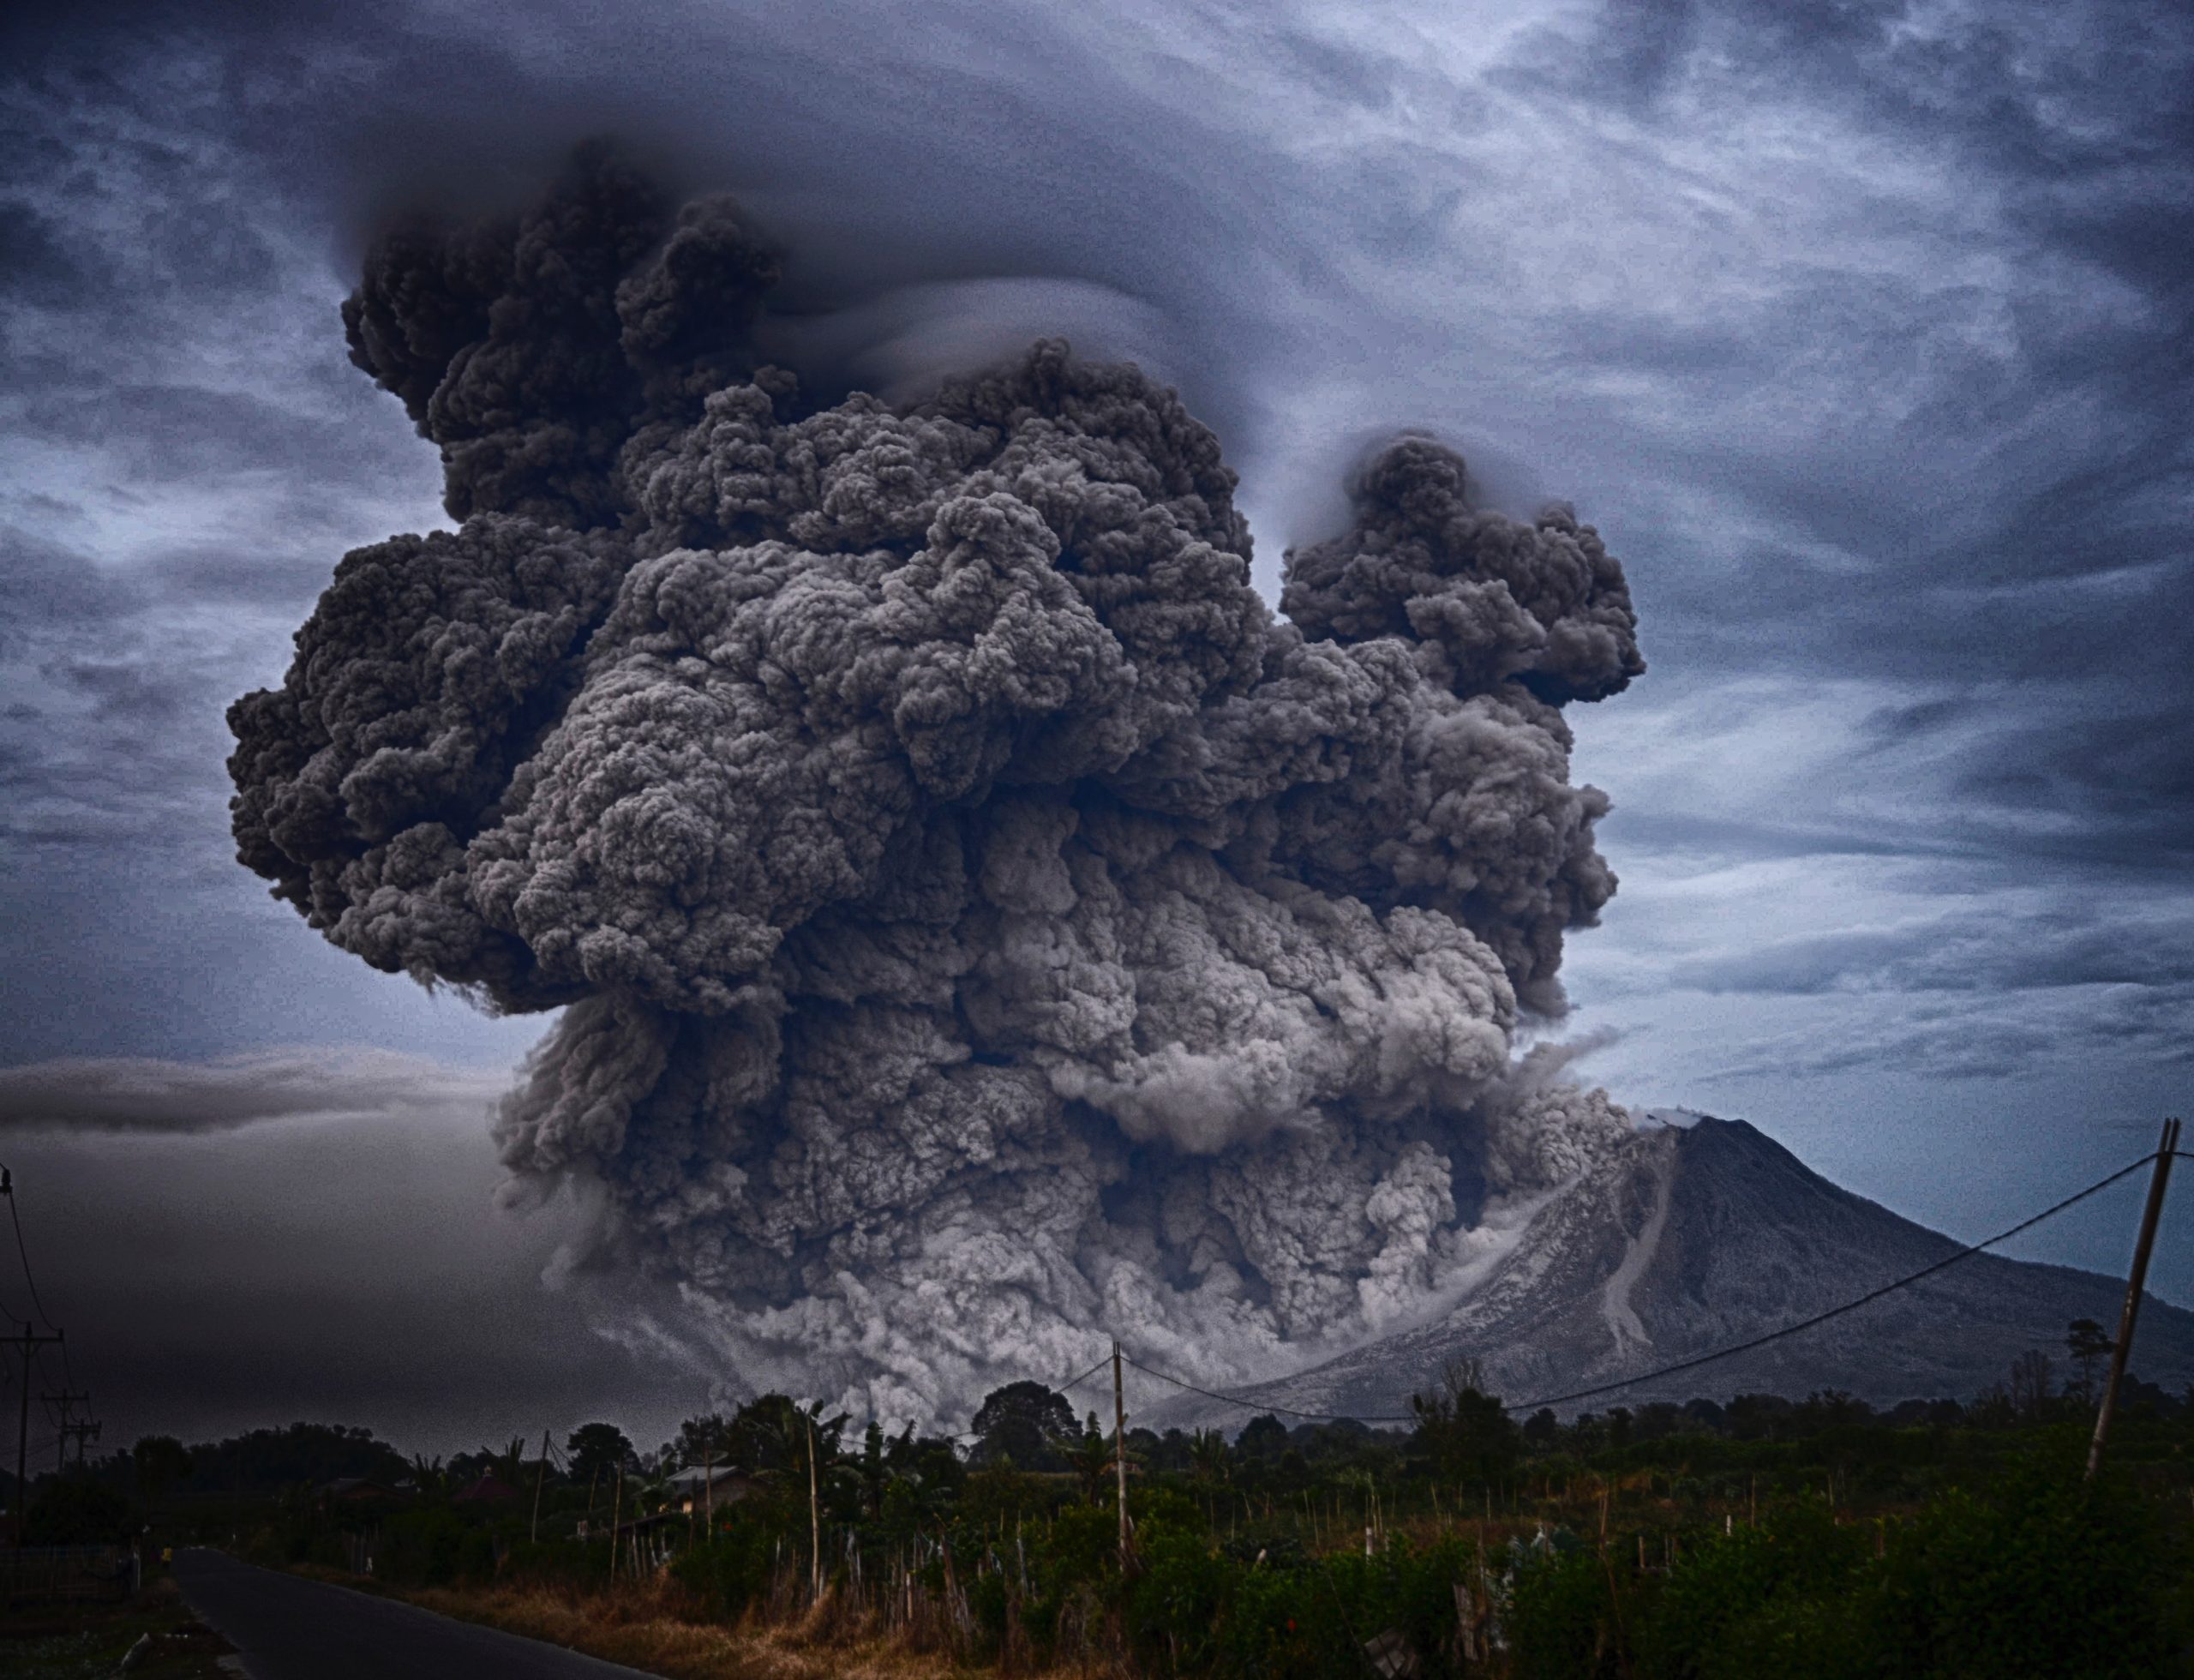 Mount Sinabung (volcano) in Indonesia erupts with a huge smoke and debris cloud. Cloudy skies are behind the volcano.